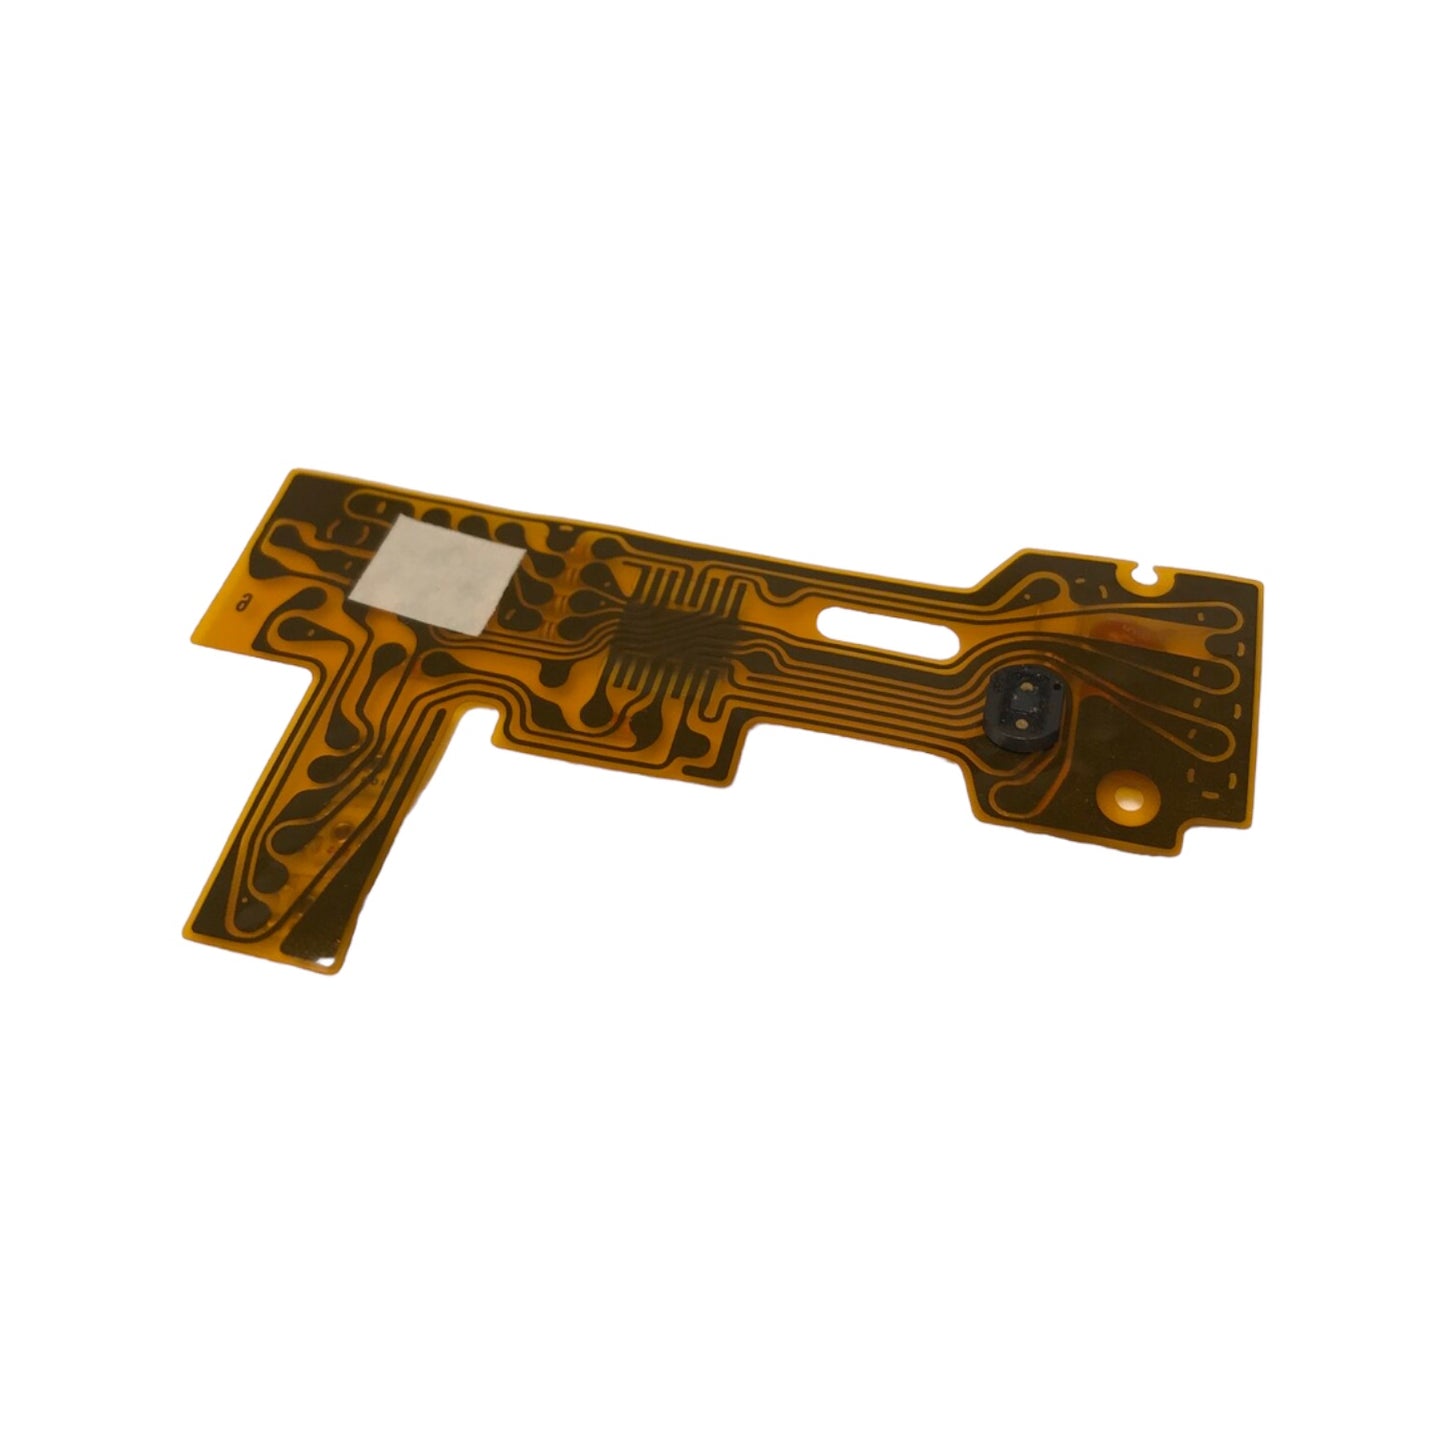 Fuji Professional GS645/GS645 Wide Flexible PCB Assembly (Y)